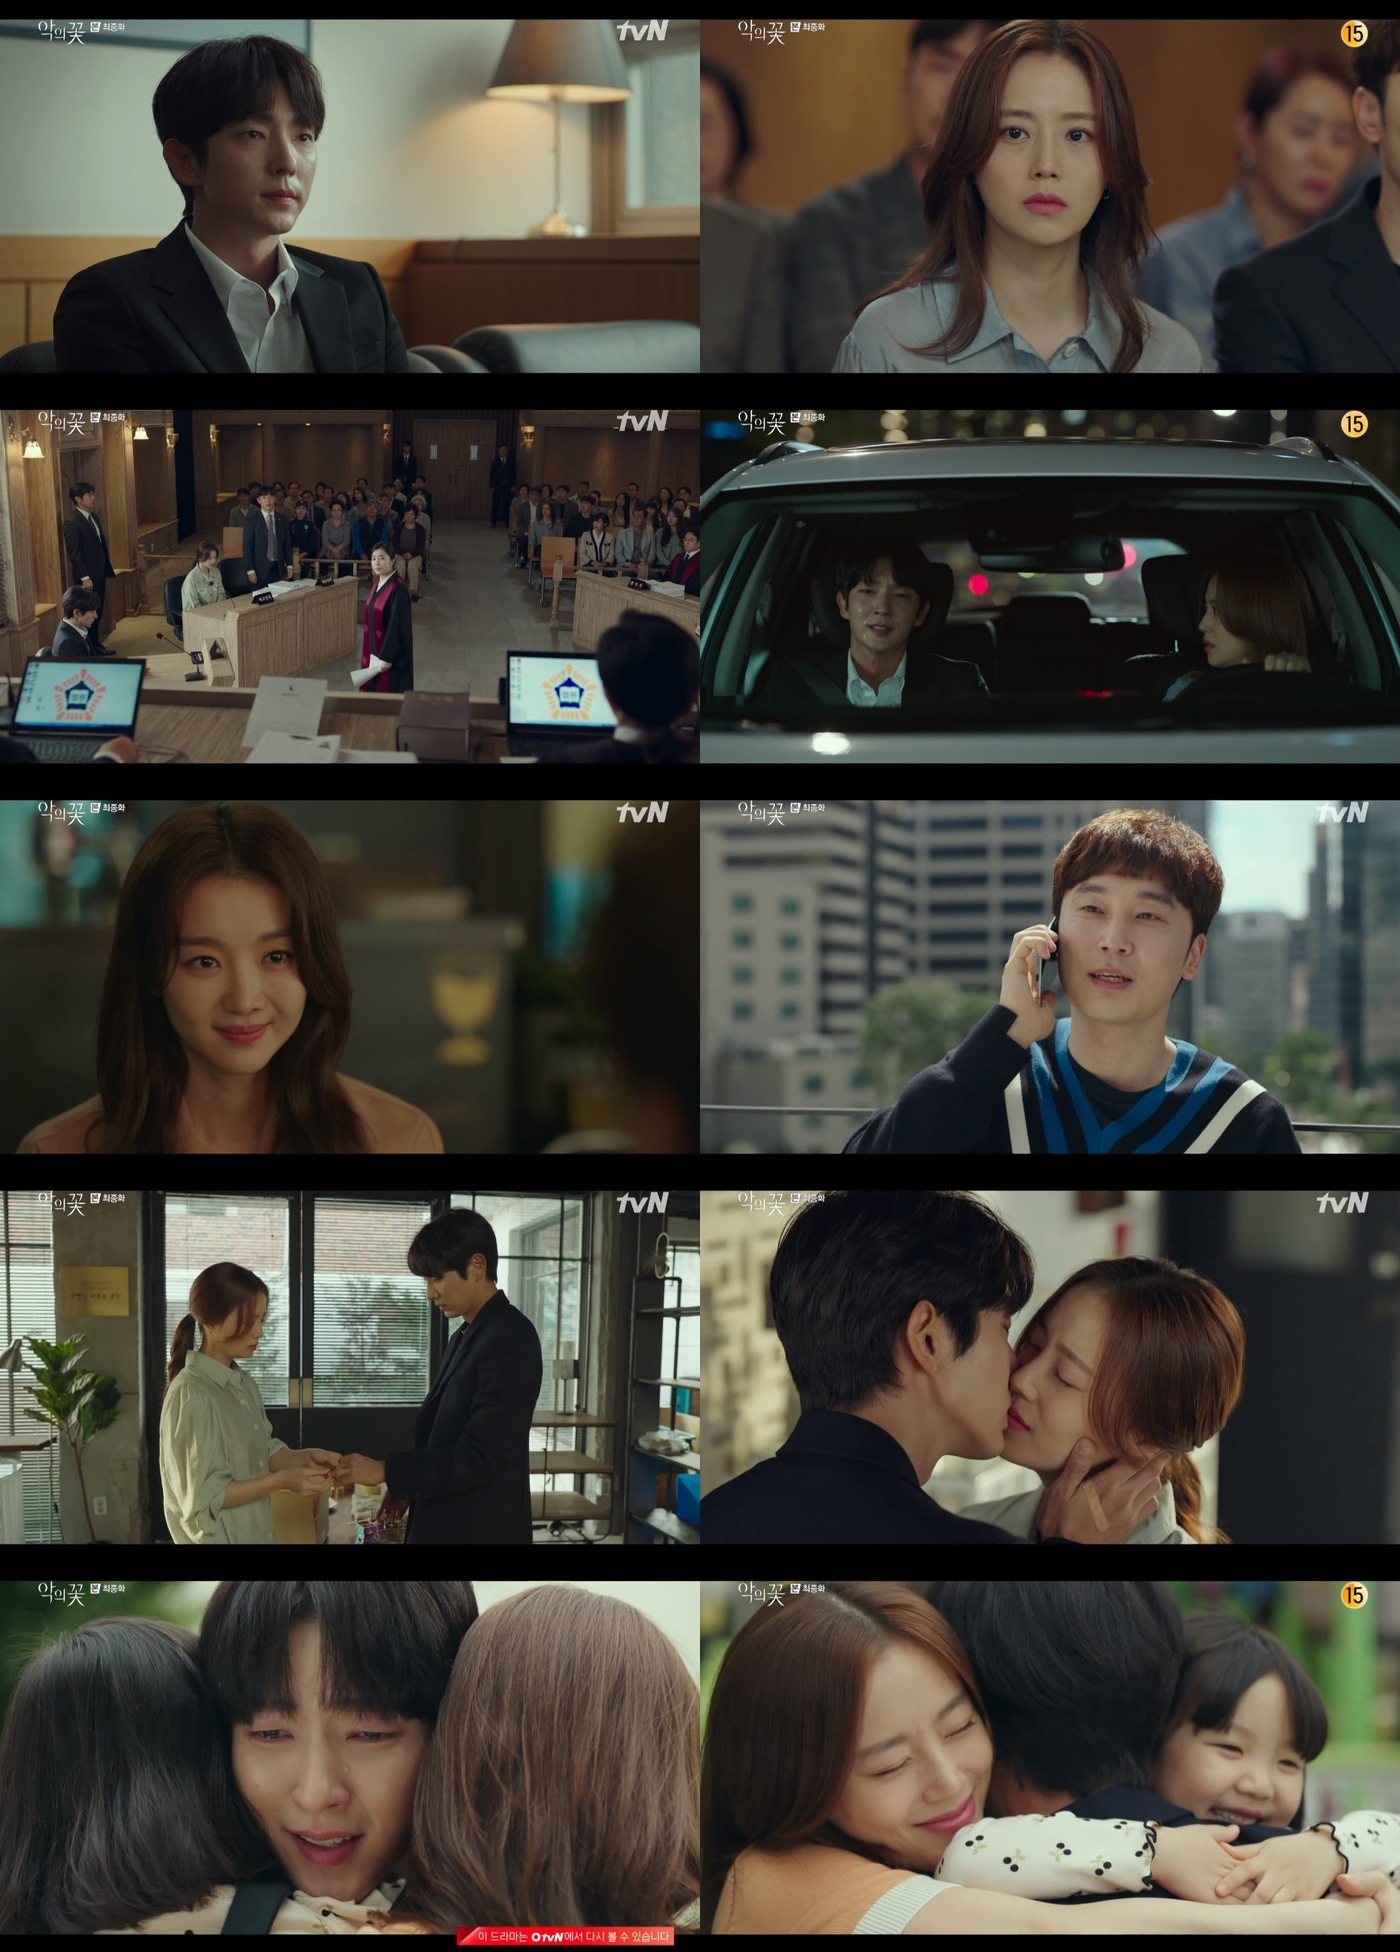 Seoul = = Lee Joon-gi and Moon Chae-won in the Flower of Evil welcomed the end of the heartbreaking end and another beginning with their belief in love.The 16th TVN drama The Flower of Evil (directed by Kim Cheol-gyu/playplayplay by Yoo Jung-hee) broadcast on the 23rd recorded an average of 6.6% and a maximum of 7.3% in the metropolitan area, and the average of 5.7% and 6.2% in the nationwide household, respectively, which changed its own highest audience rating once again.In the last episode of the day, Do Hyun-soo (Lee Joon-gi), who had lived with his own loss, once again realized his love for Cha JiWon (Moon Chae-won), and stood at a new starting point.The ending, which ended with a view of the double-story house, which regained the sound of laughter, Do Hyun-soo, who shed tears of happiness, his wife Cha JiWon, and daughter Baek Eun-ha (her daughter, Jeong Seo-yeon), hugged each other with preciousness, gave a heartfelt impression.The serial murder case in the performance, which has been excitingly unfolding while holding the hearts of the viewers, has been completely closed due to the atrocities of Baek Hee-sung (Kim Ji-hoon).Do Hae-soo (Jang Hee-jin), who was released from the real crime of the Ka Kyung-ri murder case, left the shadows of the past and went to study abroad for the first time to find a new starting point for my life.Kim Moo-jin (Seo Hyeon-woo) still expressed his mind about Do Hae-su, and he also showed his growth by shaking off the burden of his past mind.So everyone made their own choices and regained their daily lives.Do Hyun-soo, who was trapped in the prejudice of others and doubted himself, broke the wall and realized his mind, and firstly Confessions with the same words she gave to Cha JiWon, who taught her love 14 years ago.The completion of the perfect Sumi twin, which each other saves and leads to a new world, was enough to leave an unforgettable afterlife.In addition, The Flower of Evil  opened a new horizon of the Suspense Melody genre by tightly intertwining the dense emotional lines of each character in the events that made it impossible to watch for a single moment from the first to the 16th.It was an unforeseen story born from the fingertips of Yoo Jung-hee, a unique sense of director Kim Chul-gyu, and a combination of directing sense that freely transformed suspense and melody.Here, all actors, including Lee Joon-gi (Do Hyun-soo station), Moon Chae-won (Cha JiWon station), Jang Hee-jin (Do Hae-su station), and Seo Hyeon-woo (Kim Moo-jin station), who had three characters in the house theater, He had renewed his life character.As such, The Flower of Evil , which caused explosive synergy by both writers, directors, and actors, has attracted viewers by leaving modifiers such as hot topic, rising audience rating, and ending restaurant and life drama.In addition, through the existence of Do Hyun-soo, he constantly depicted the abalone of good () and evil () and derived more meaningful stories.The Flower of Evil , which conveys the essence of a beautiful and beautiful love that blooms at the end even in a place covered with maliciousness, bloomed in the hearts of viewers and left a scent of fragrance.